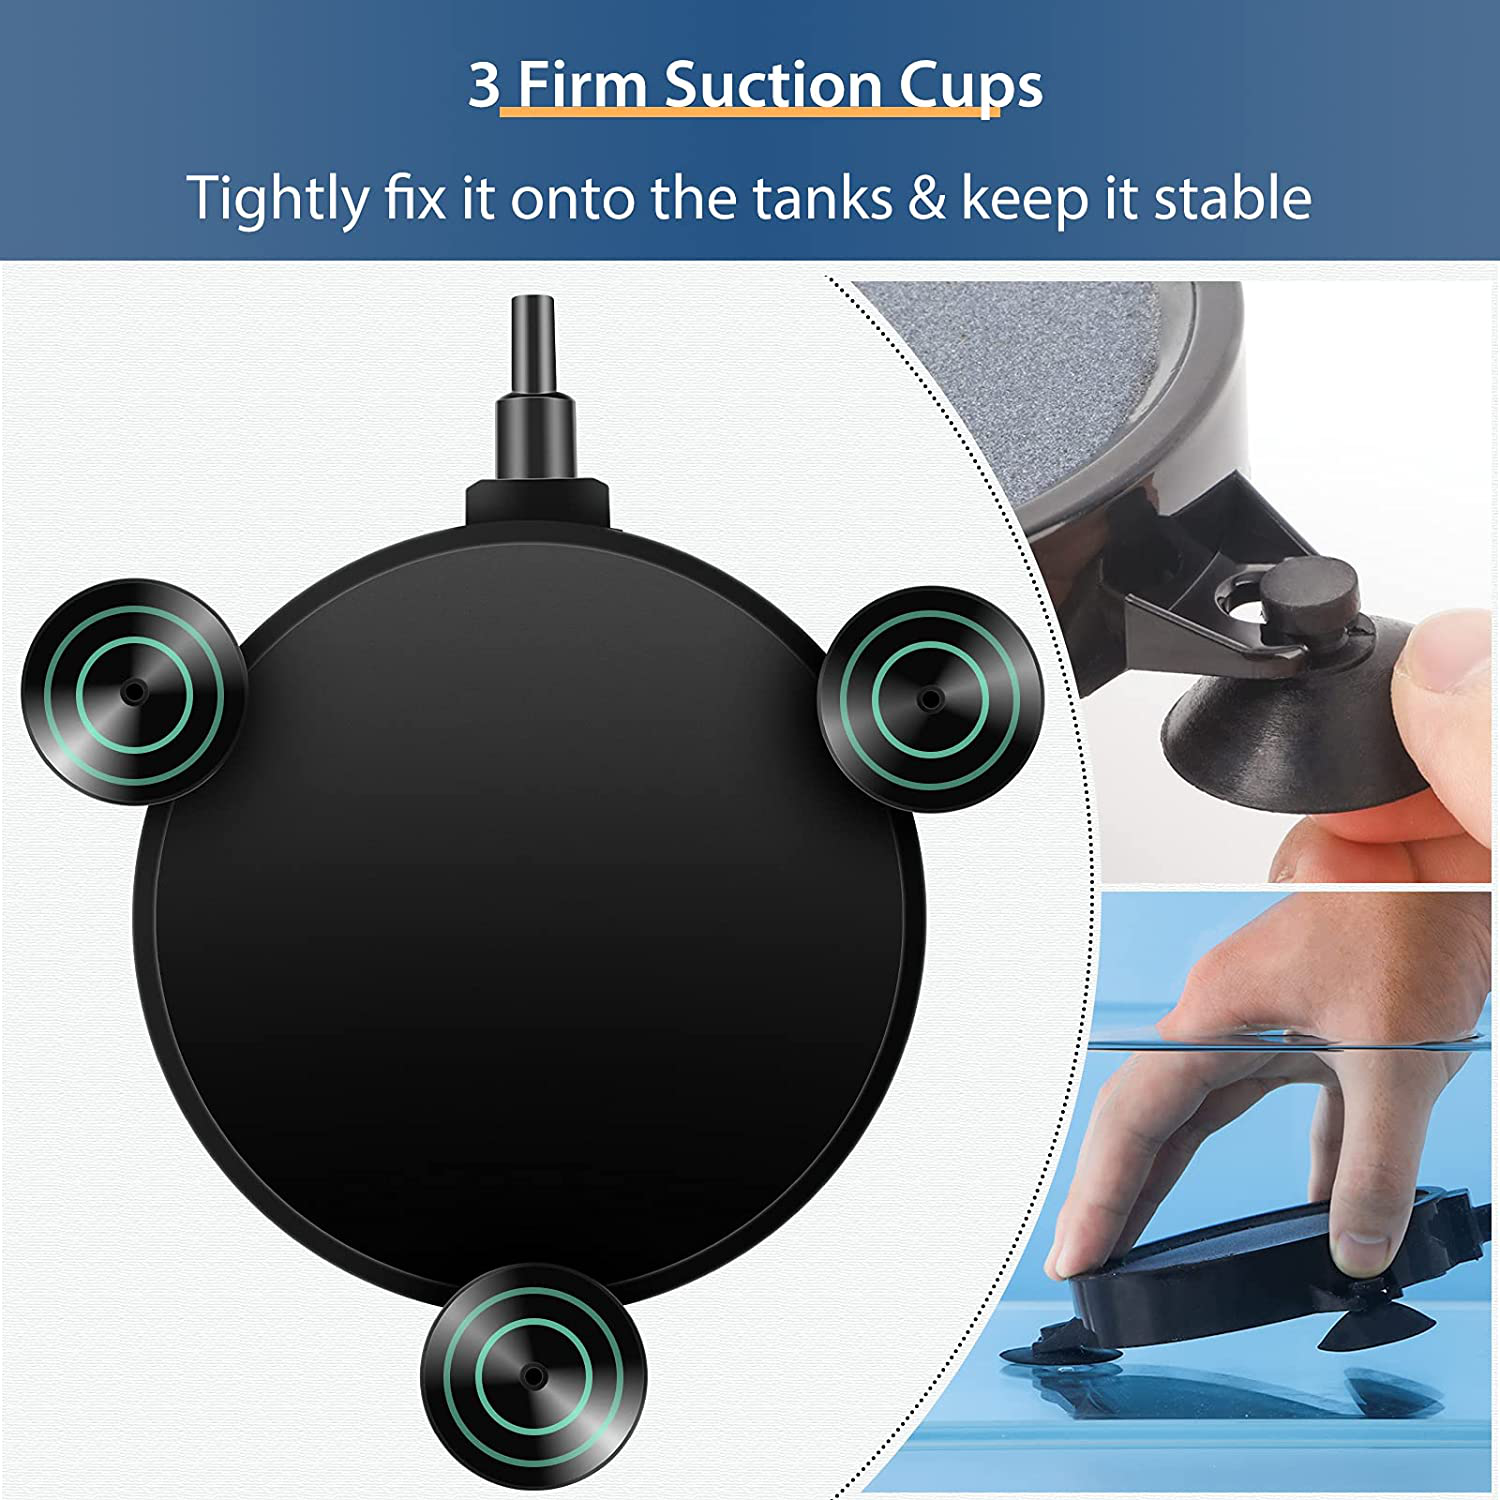 Pawfly 4 Inch Air Stone Disc Bubble Diffuser with Suction Cups for Pump Aquarium Fish Tank Animals & Pet Supplies > Pet Supplies > Fish Supplies > Aquarium Air Stones & Diffusers Pawfly   